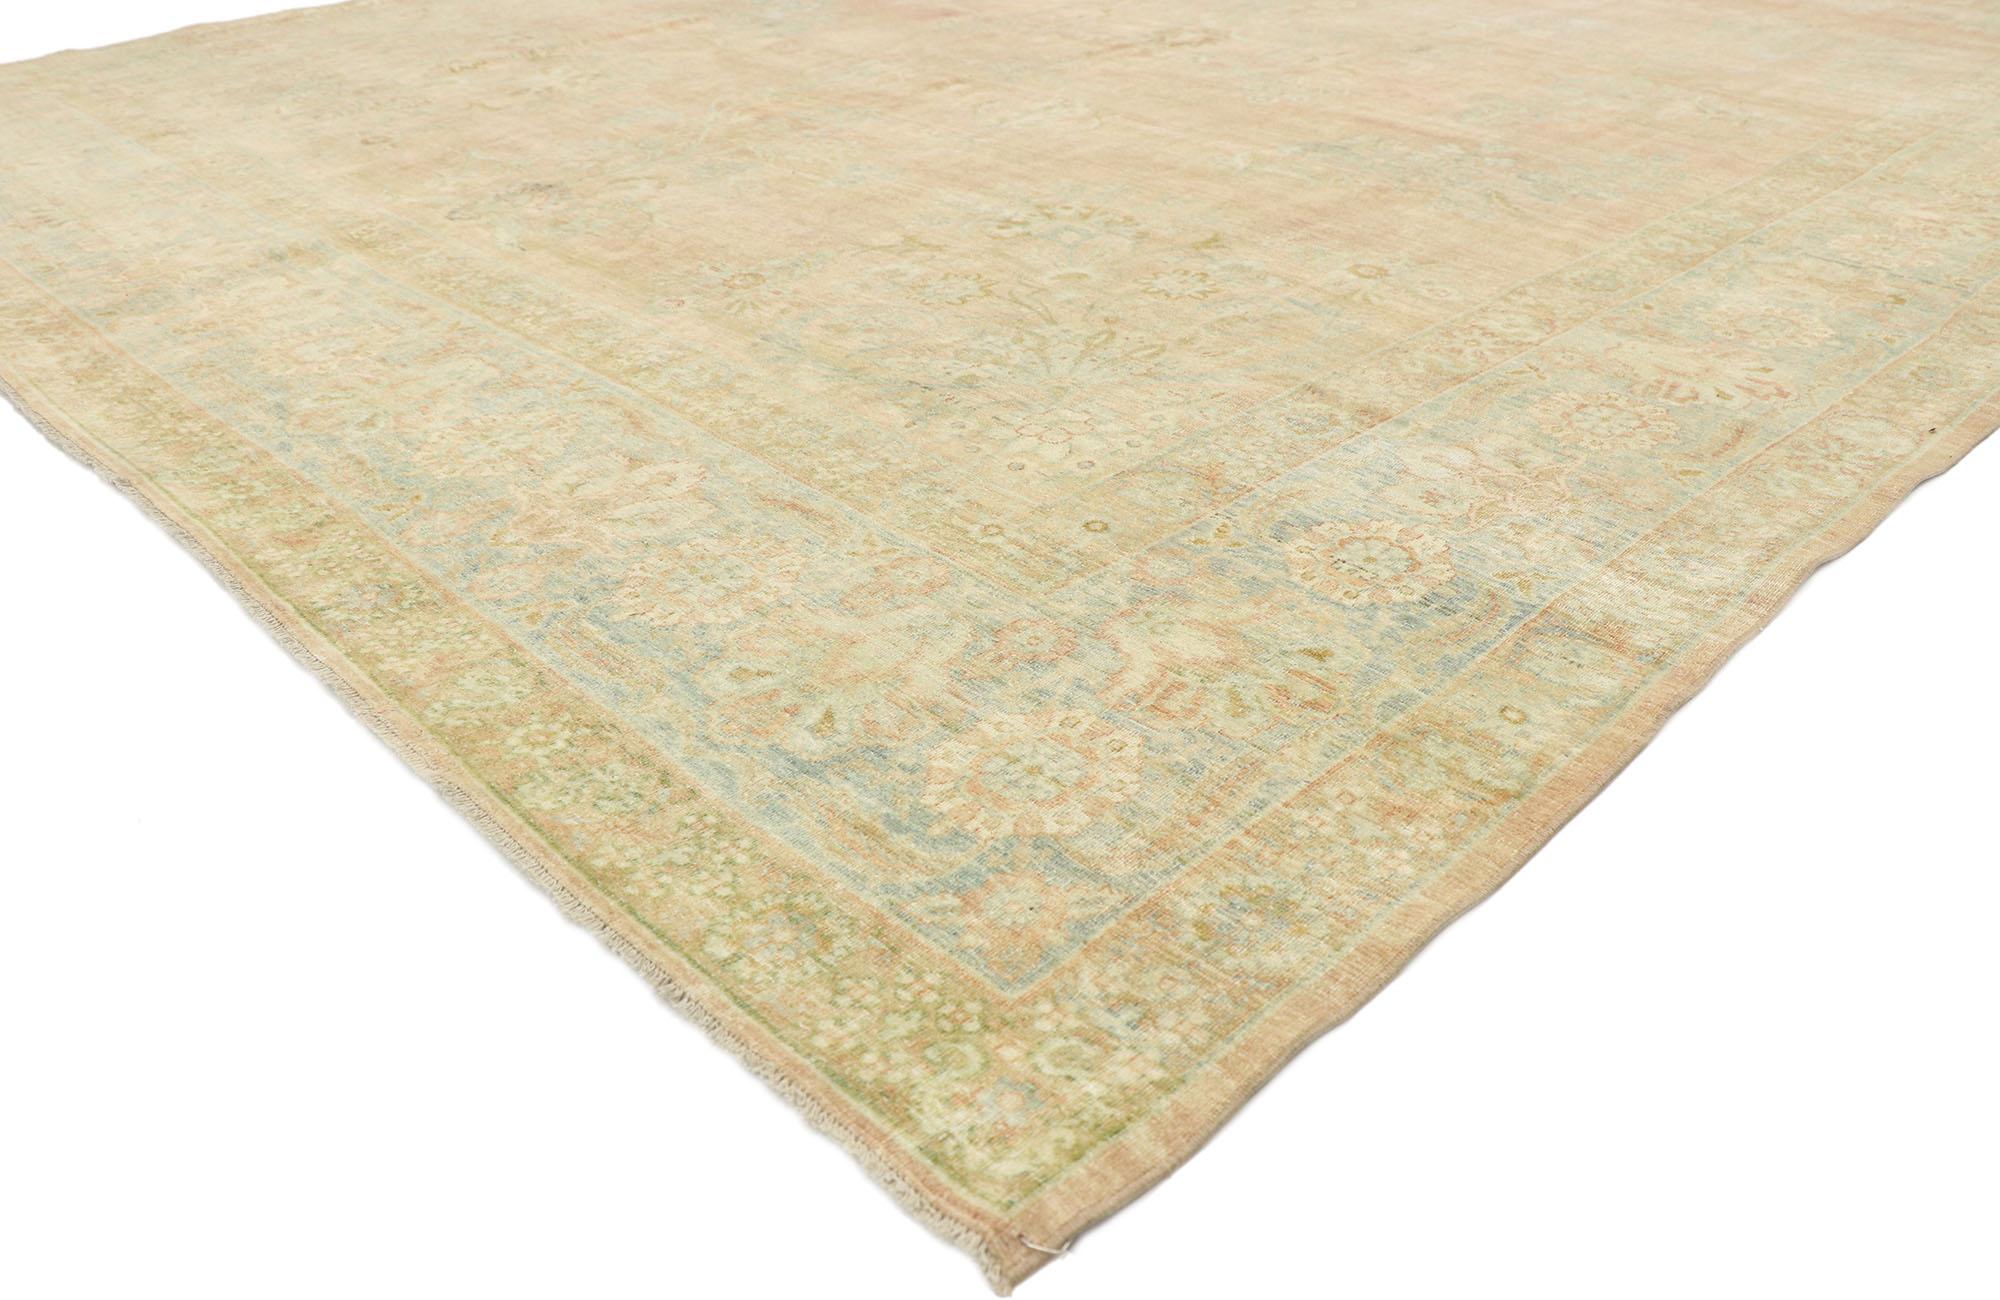 76890 Rustic Antique Persian Kerman Rug, 08'08 x 12'06.
Rustic elegance meets warm southern charm in this hand knotted wool distressed antique Persian Kerman rug. The timeless floral design and muted earth-tone colors woven into this piece work